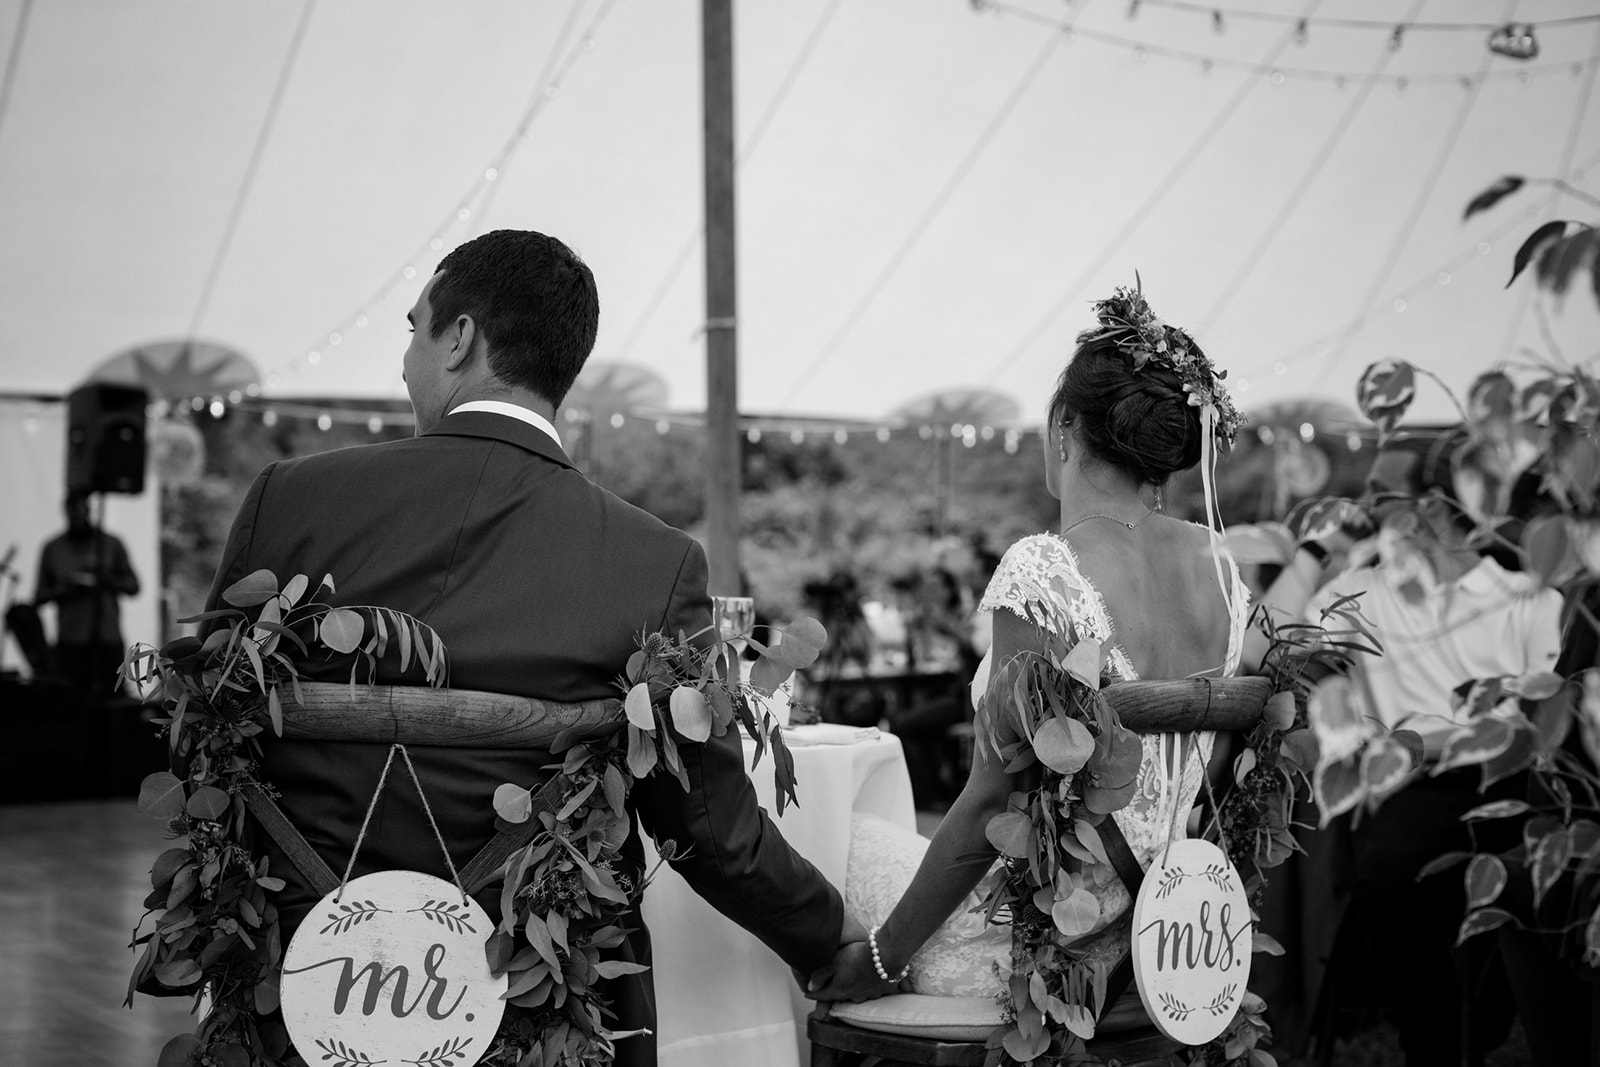 Bride and groom holding hands at their reception sweetheart table with cross back wooden chairs, greenery and mr. and mrs. signs hanging on the back of their chairs - Pearl Weddings & Events